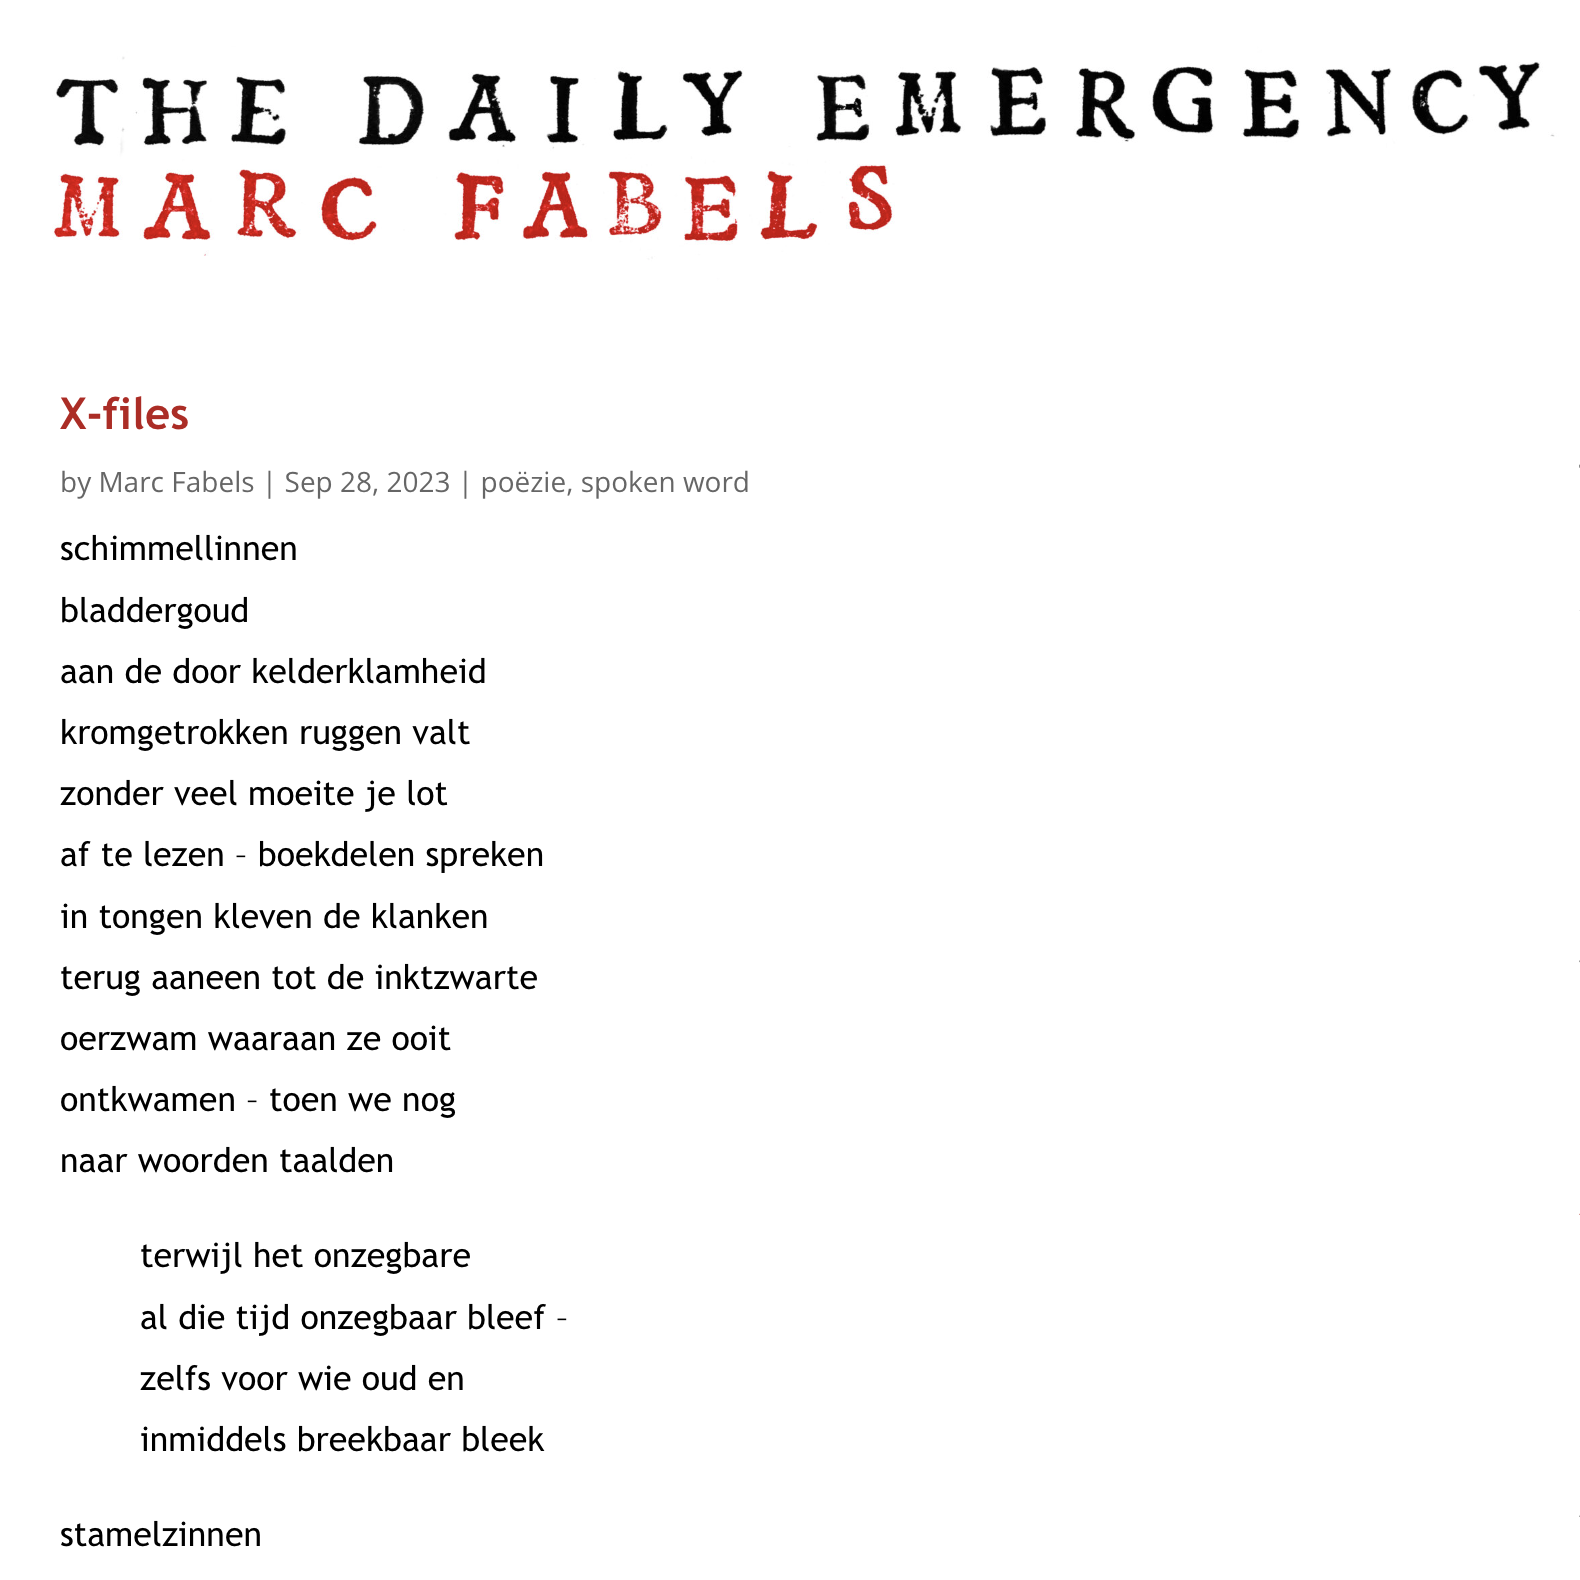 THE DAILY EMERGENCY